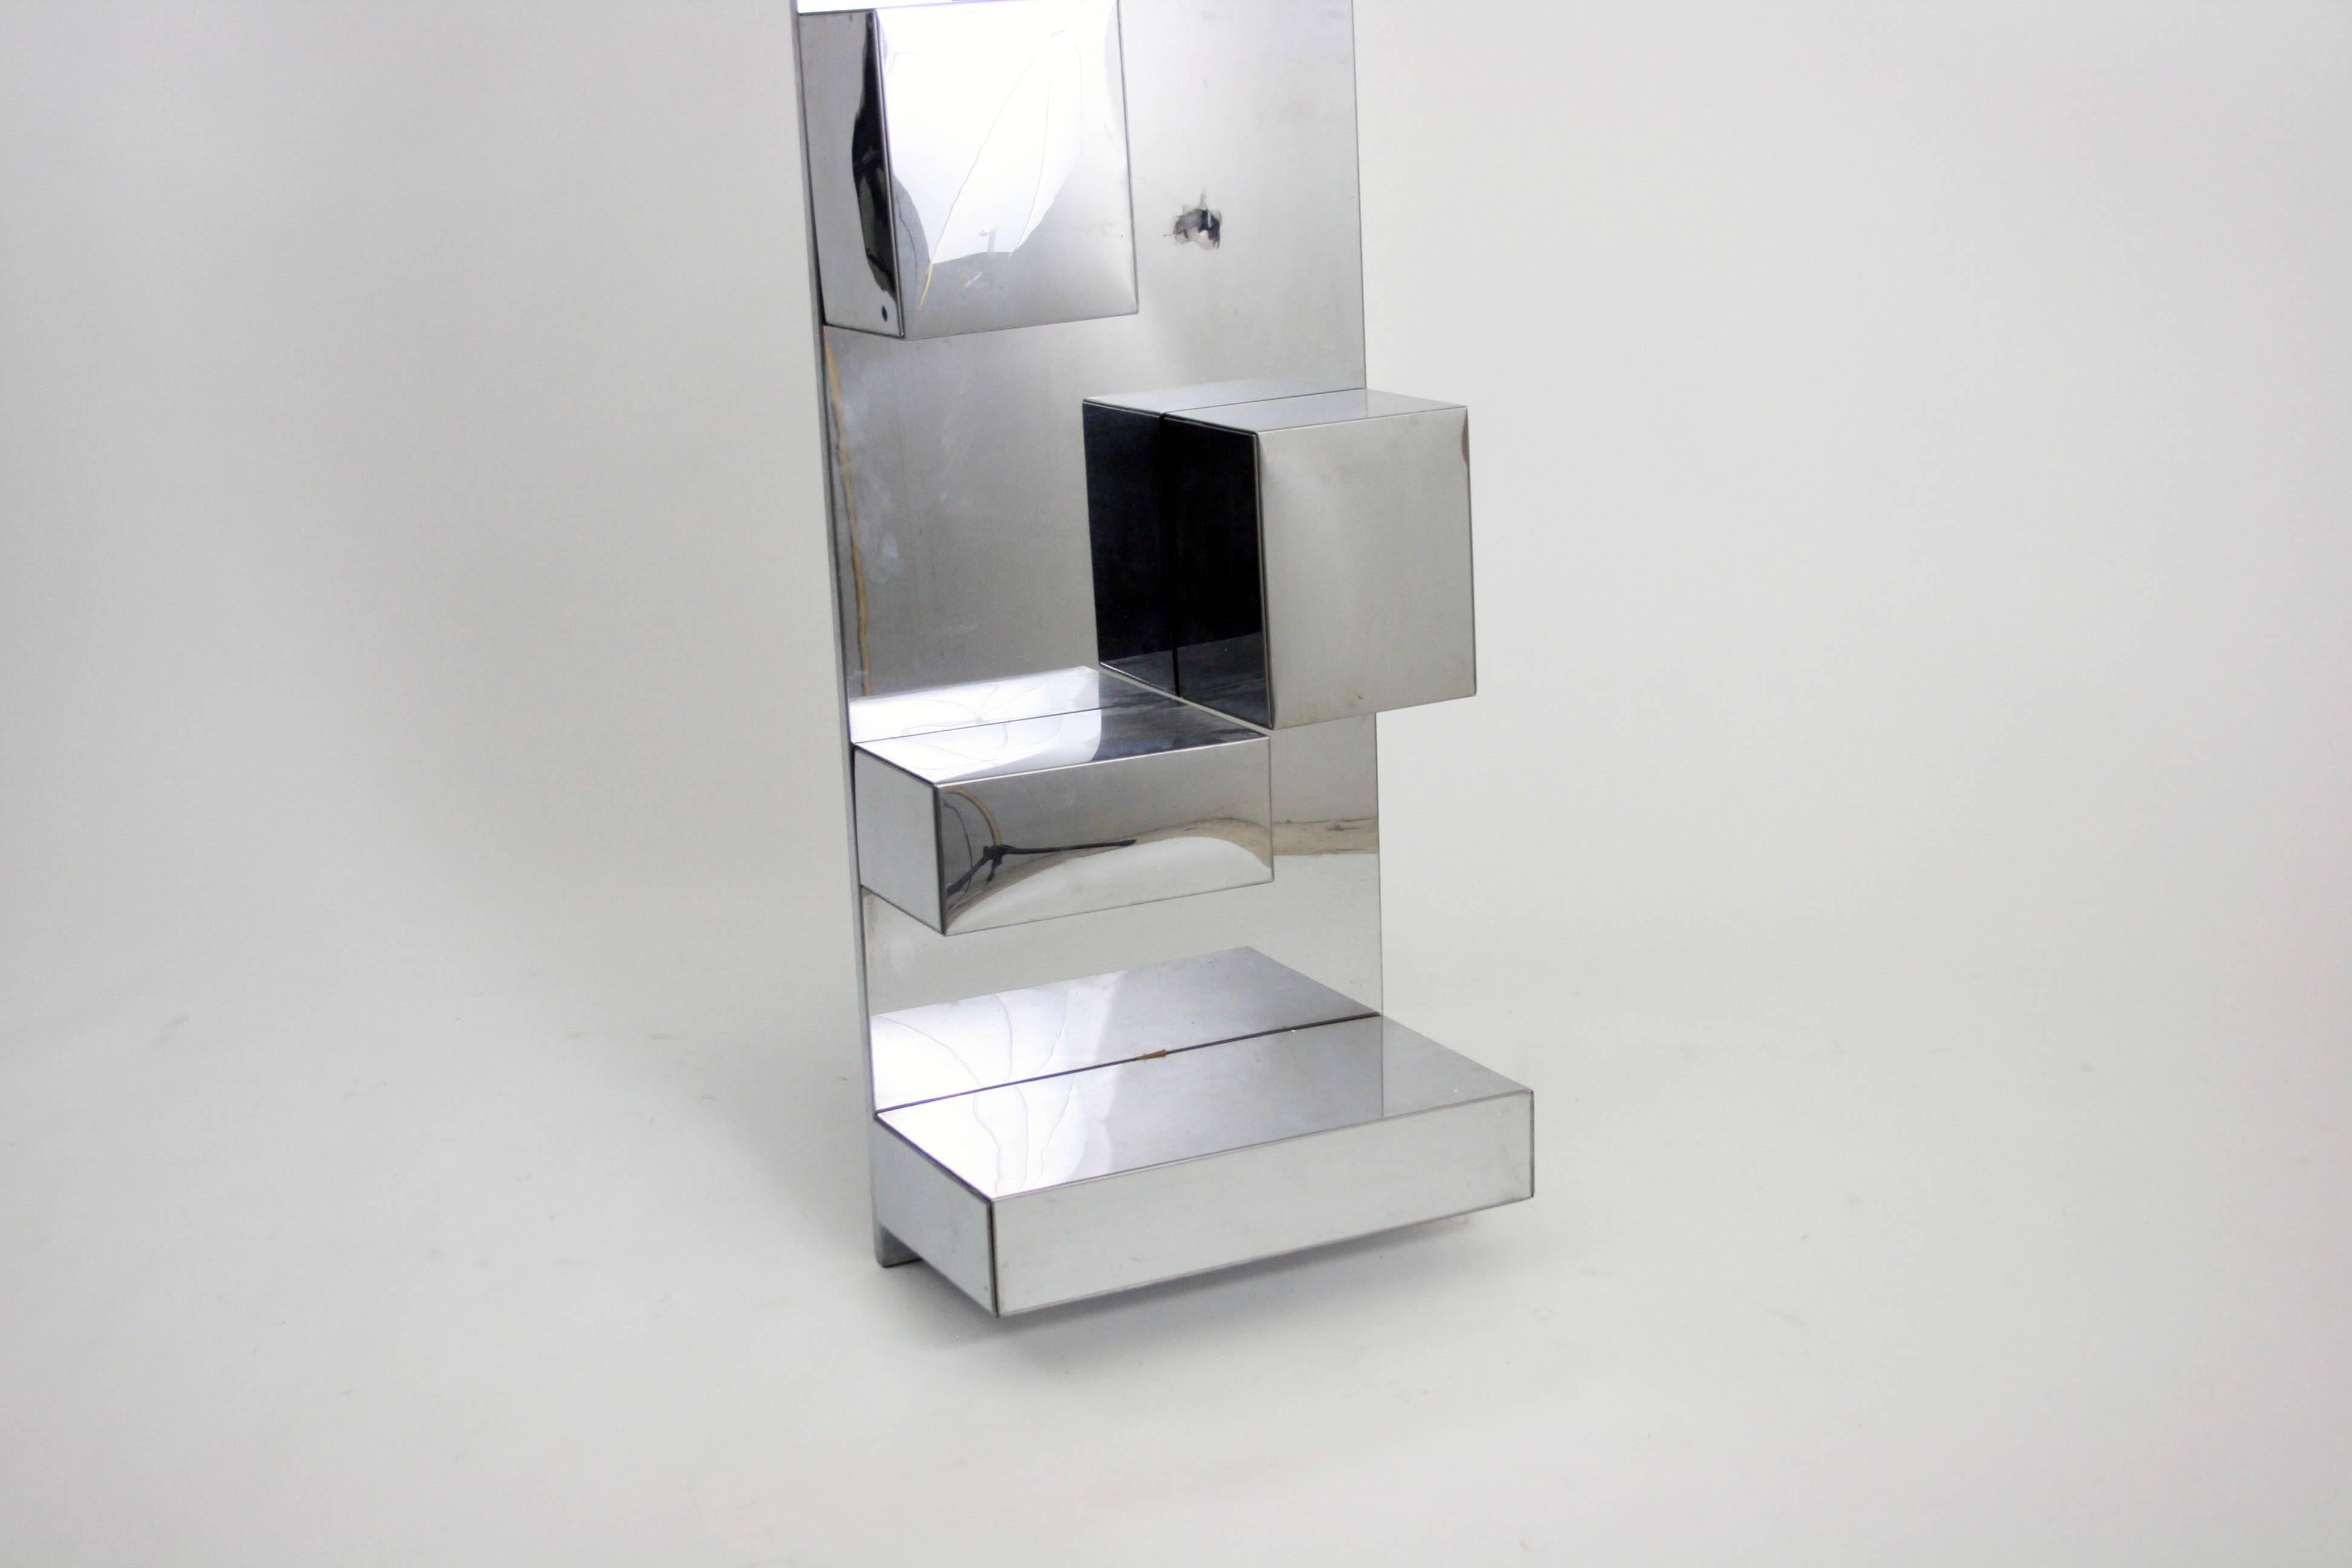 Geometric polished aluminium wall sculpture or shelf attributed to Curis Jere in excellent condition circa 1970s. This piece looks amazing and each folded aluminium shelf can be removed to hand the main support so that it floats on the wall.